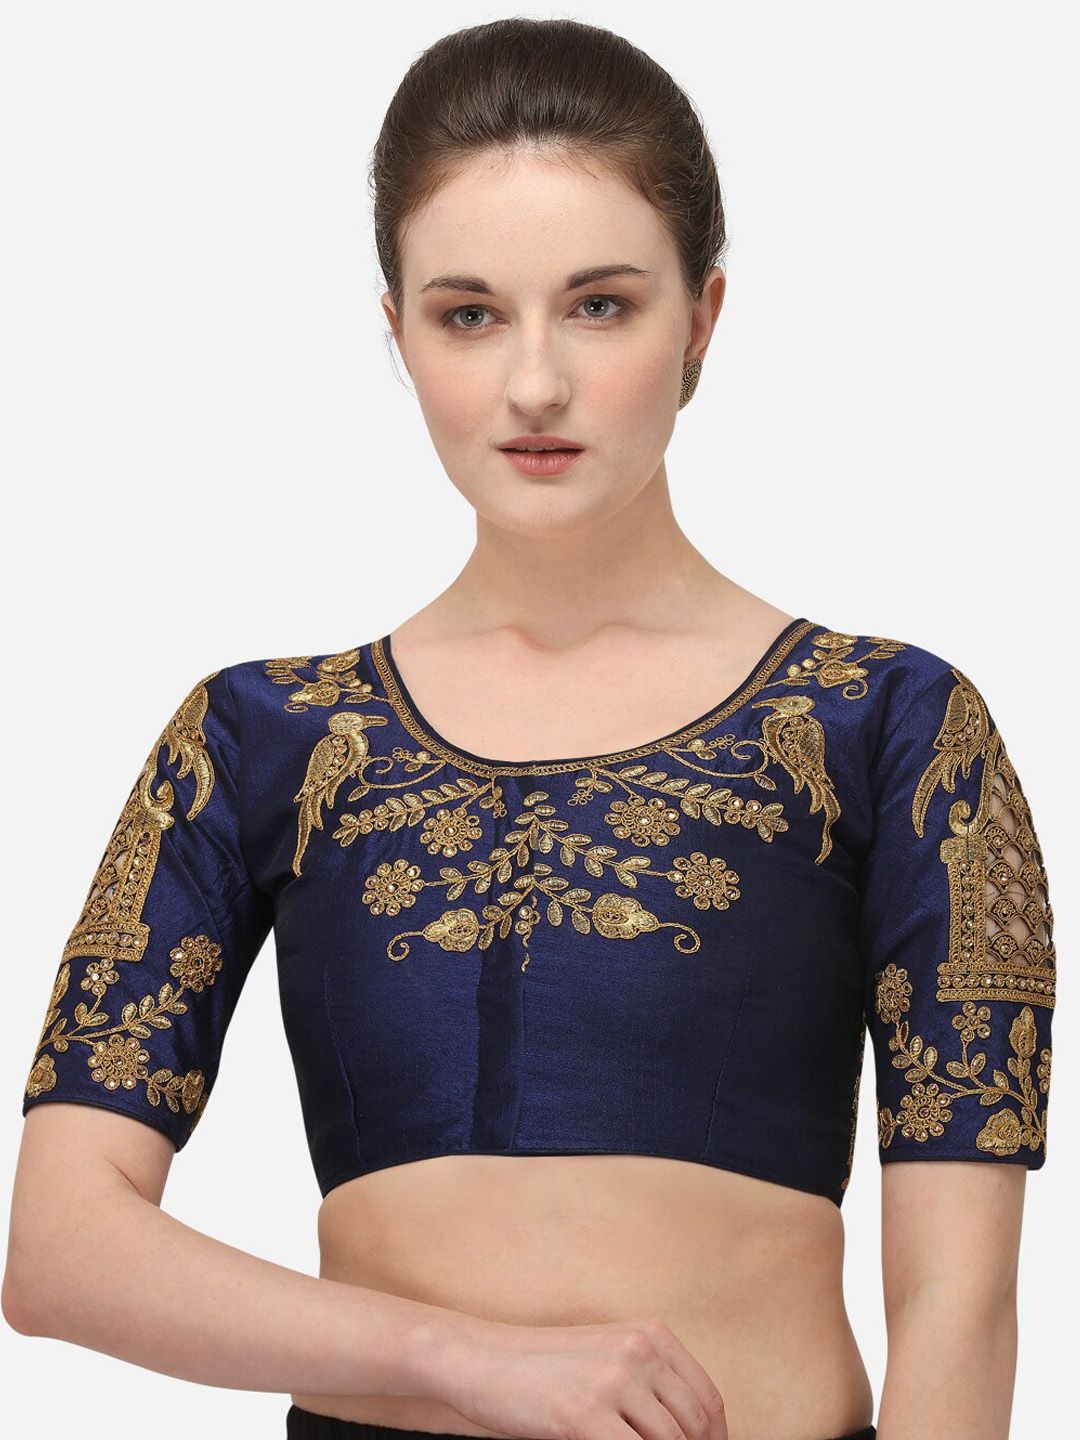 Amrutam Fab Navy Blue & Gold-Coloured Embroidered Silk Saree Blouse Price in India